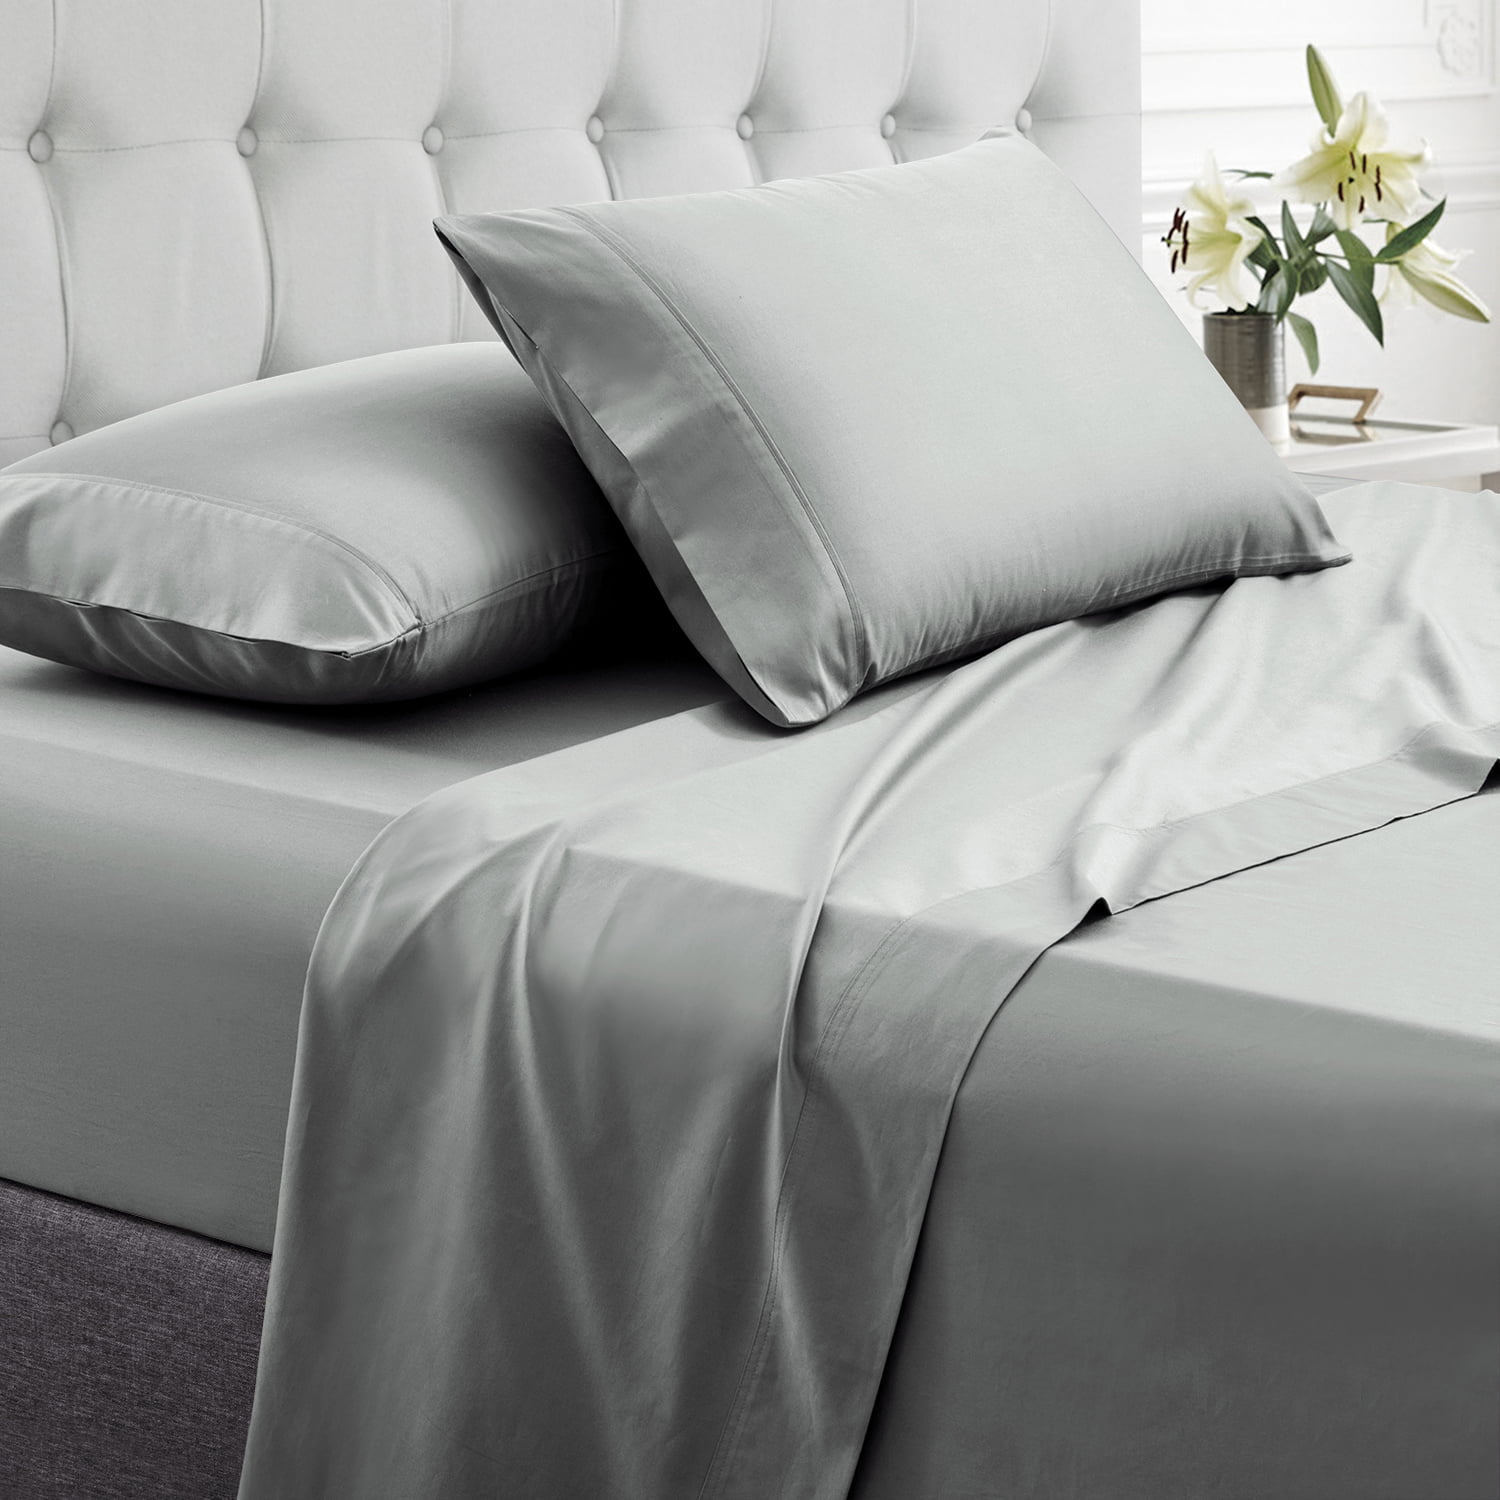 Egyptian Percale 100% Cotton Sheet Sets 300 Thread Count 